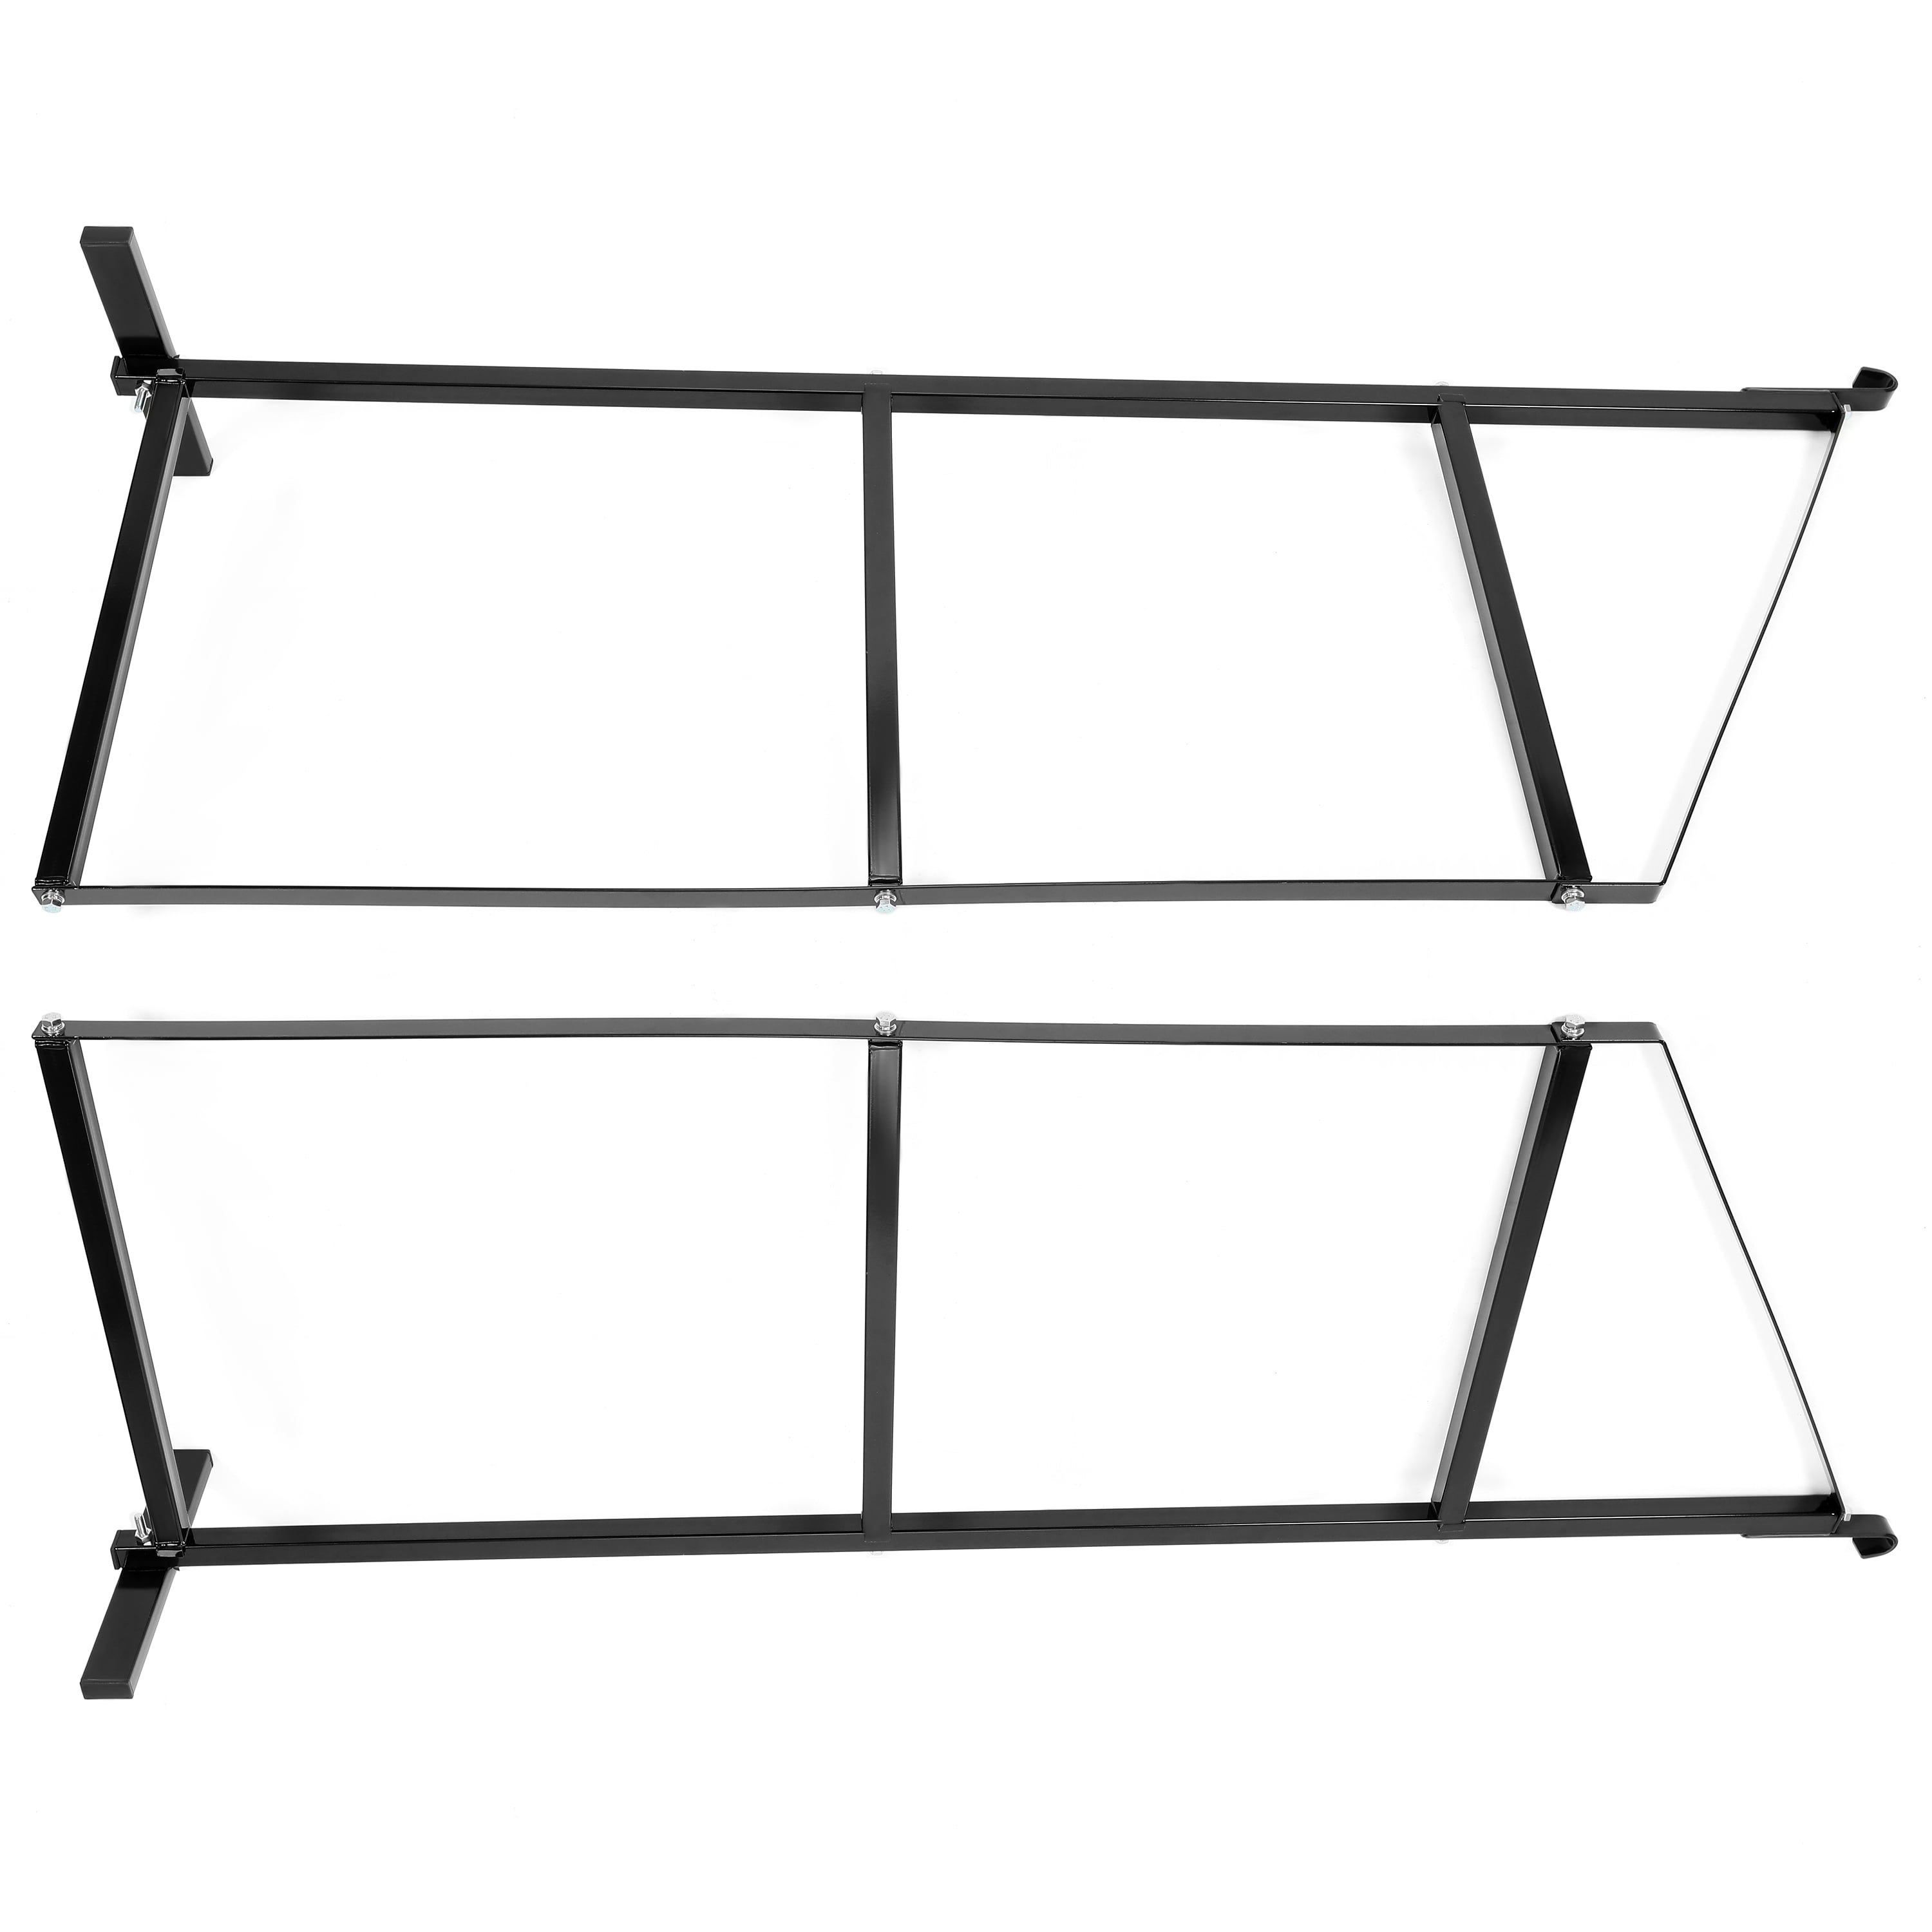 Instant Shipping Container Shelving Brackets (3 Pack) (DOES NOT